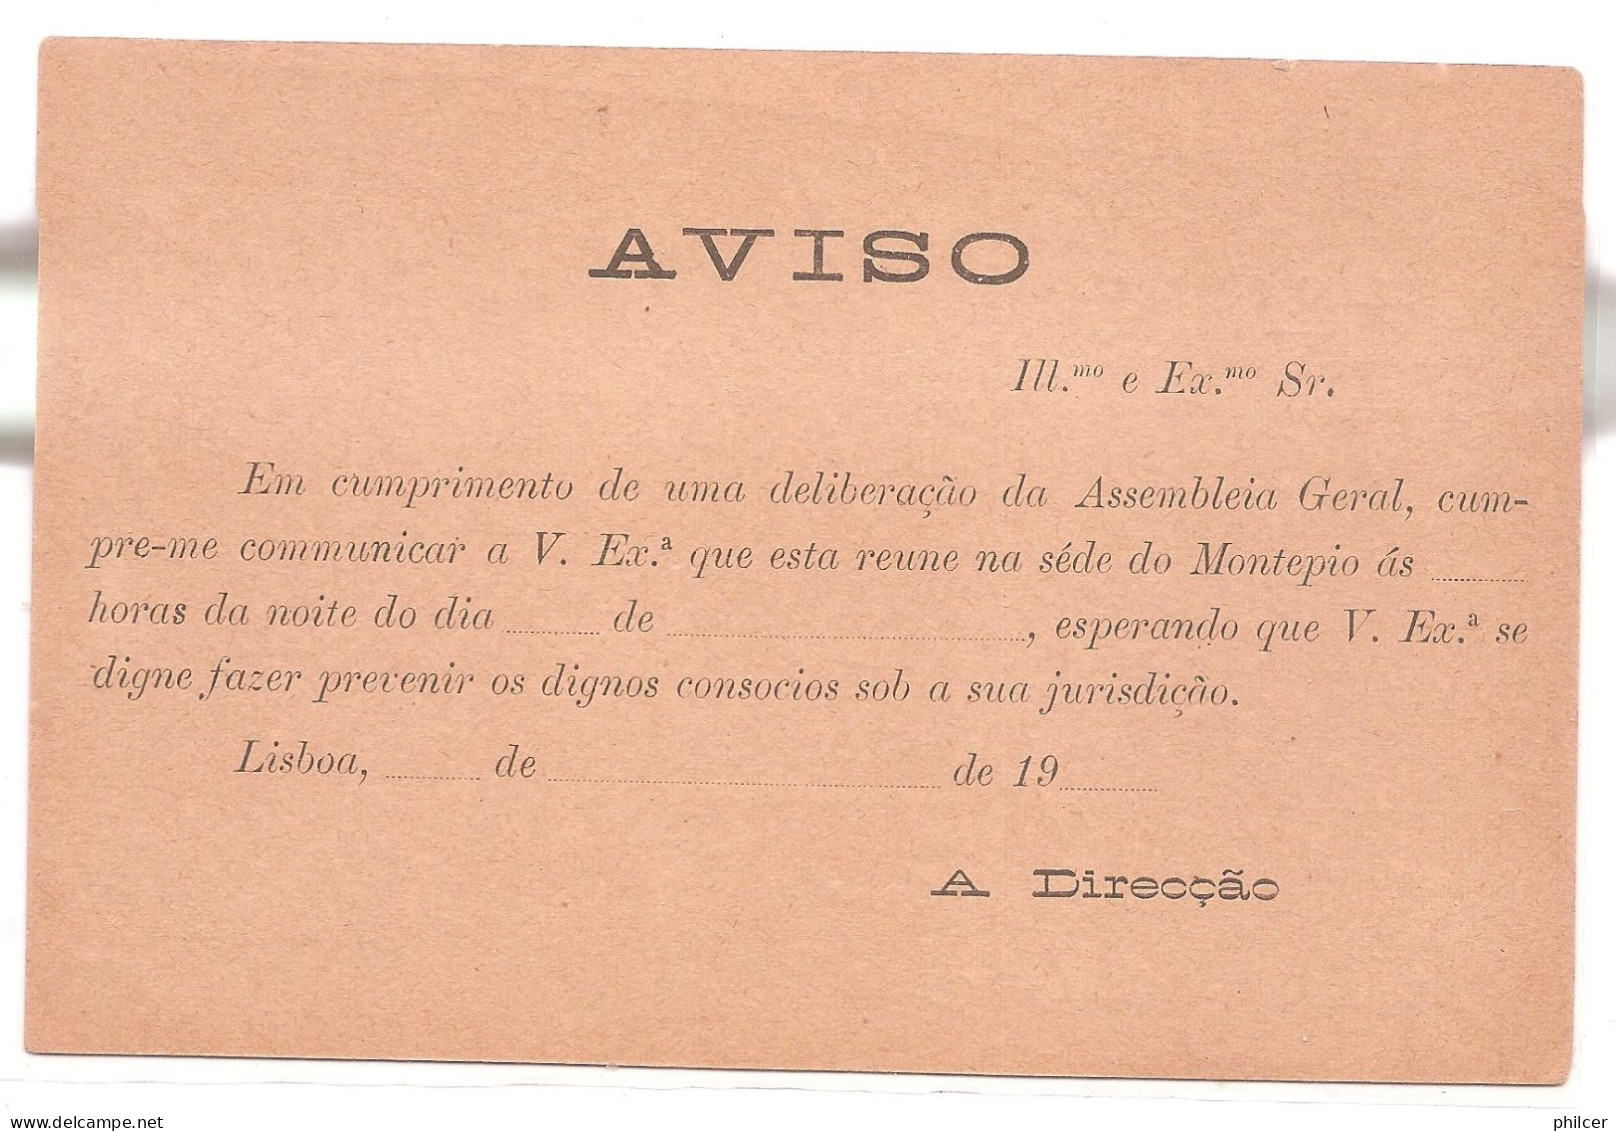 Portugal, 1905, S. N. R. - Covers & Documents